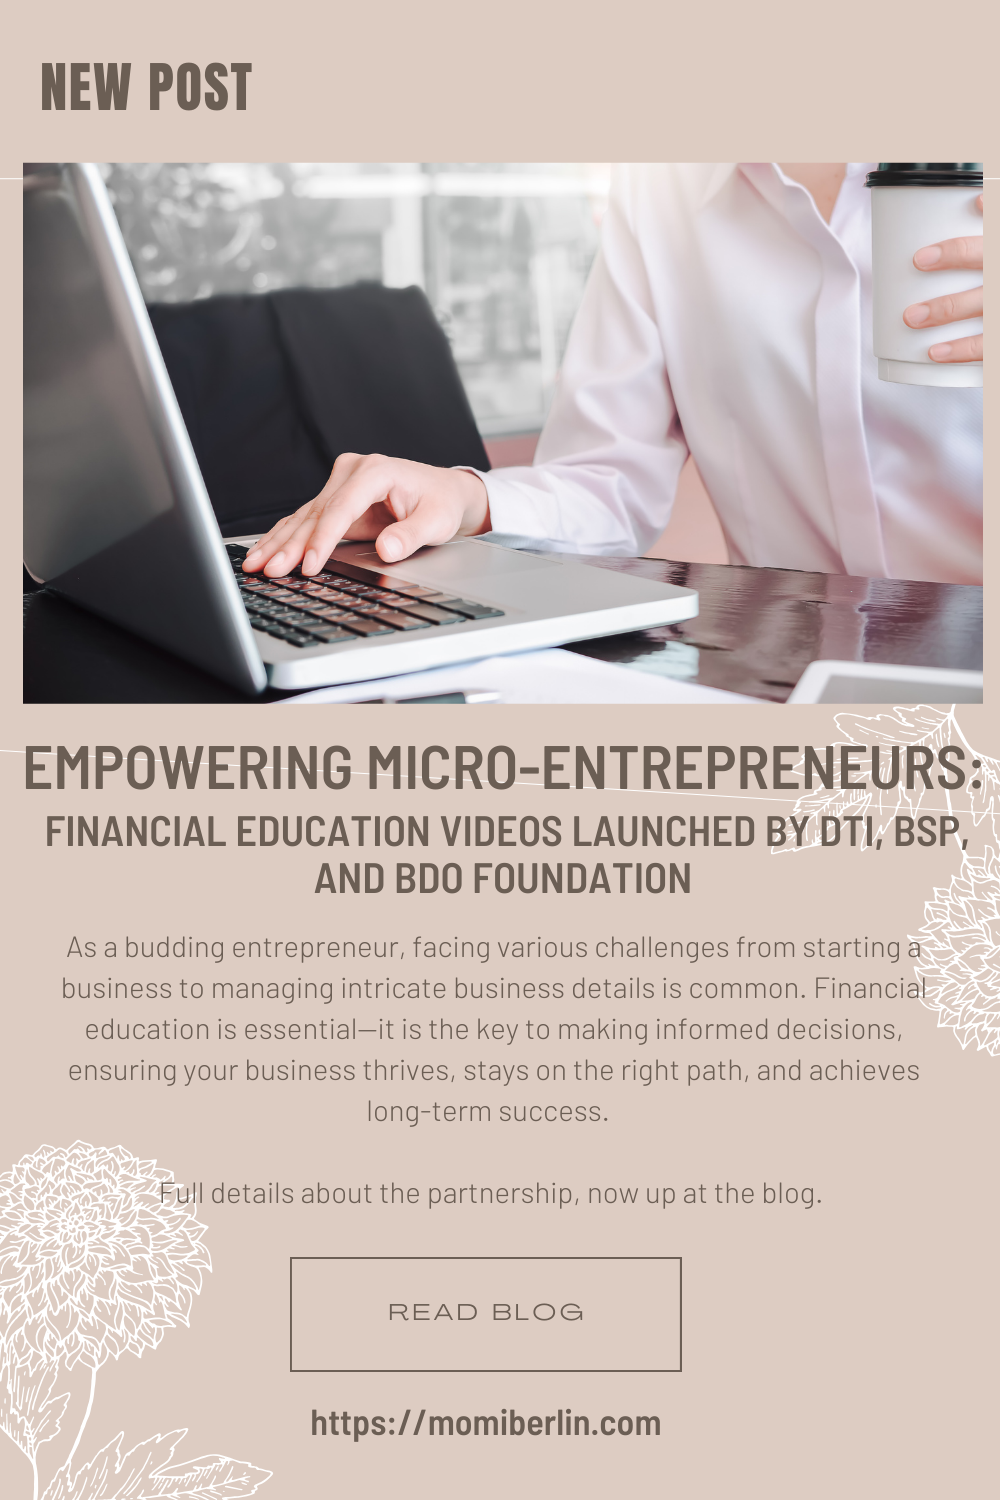 Empowering Micro-Entrepreneurs: Financial Education Videos Launched by DTI, BSP, and BDO Foundation